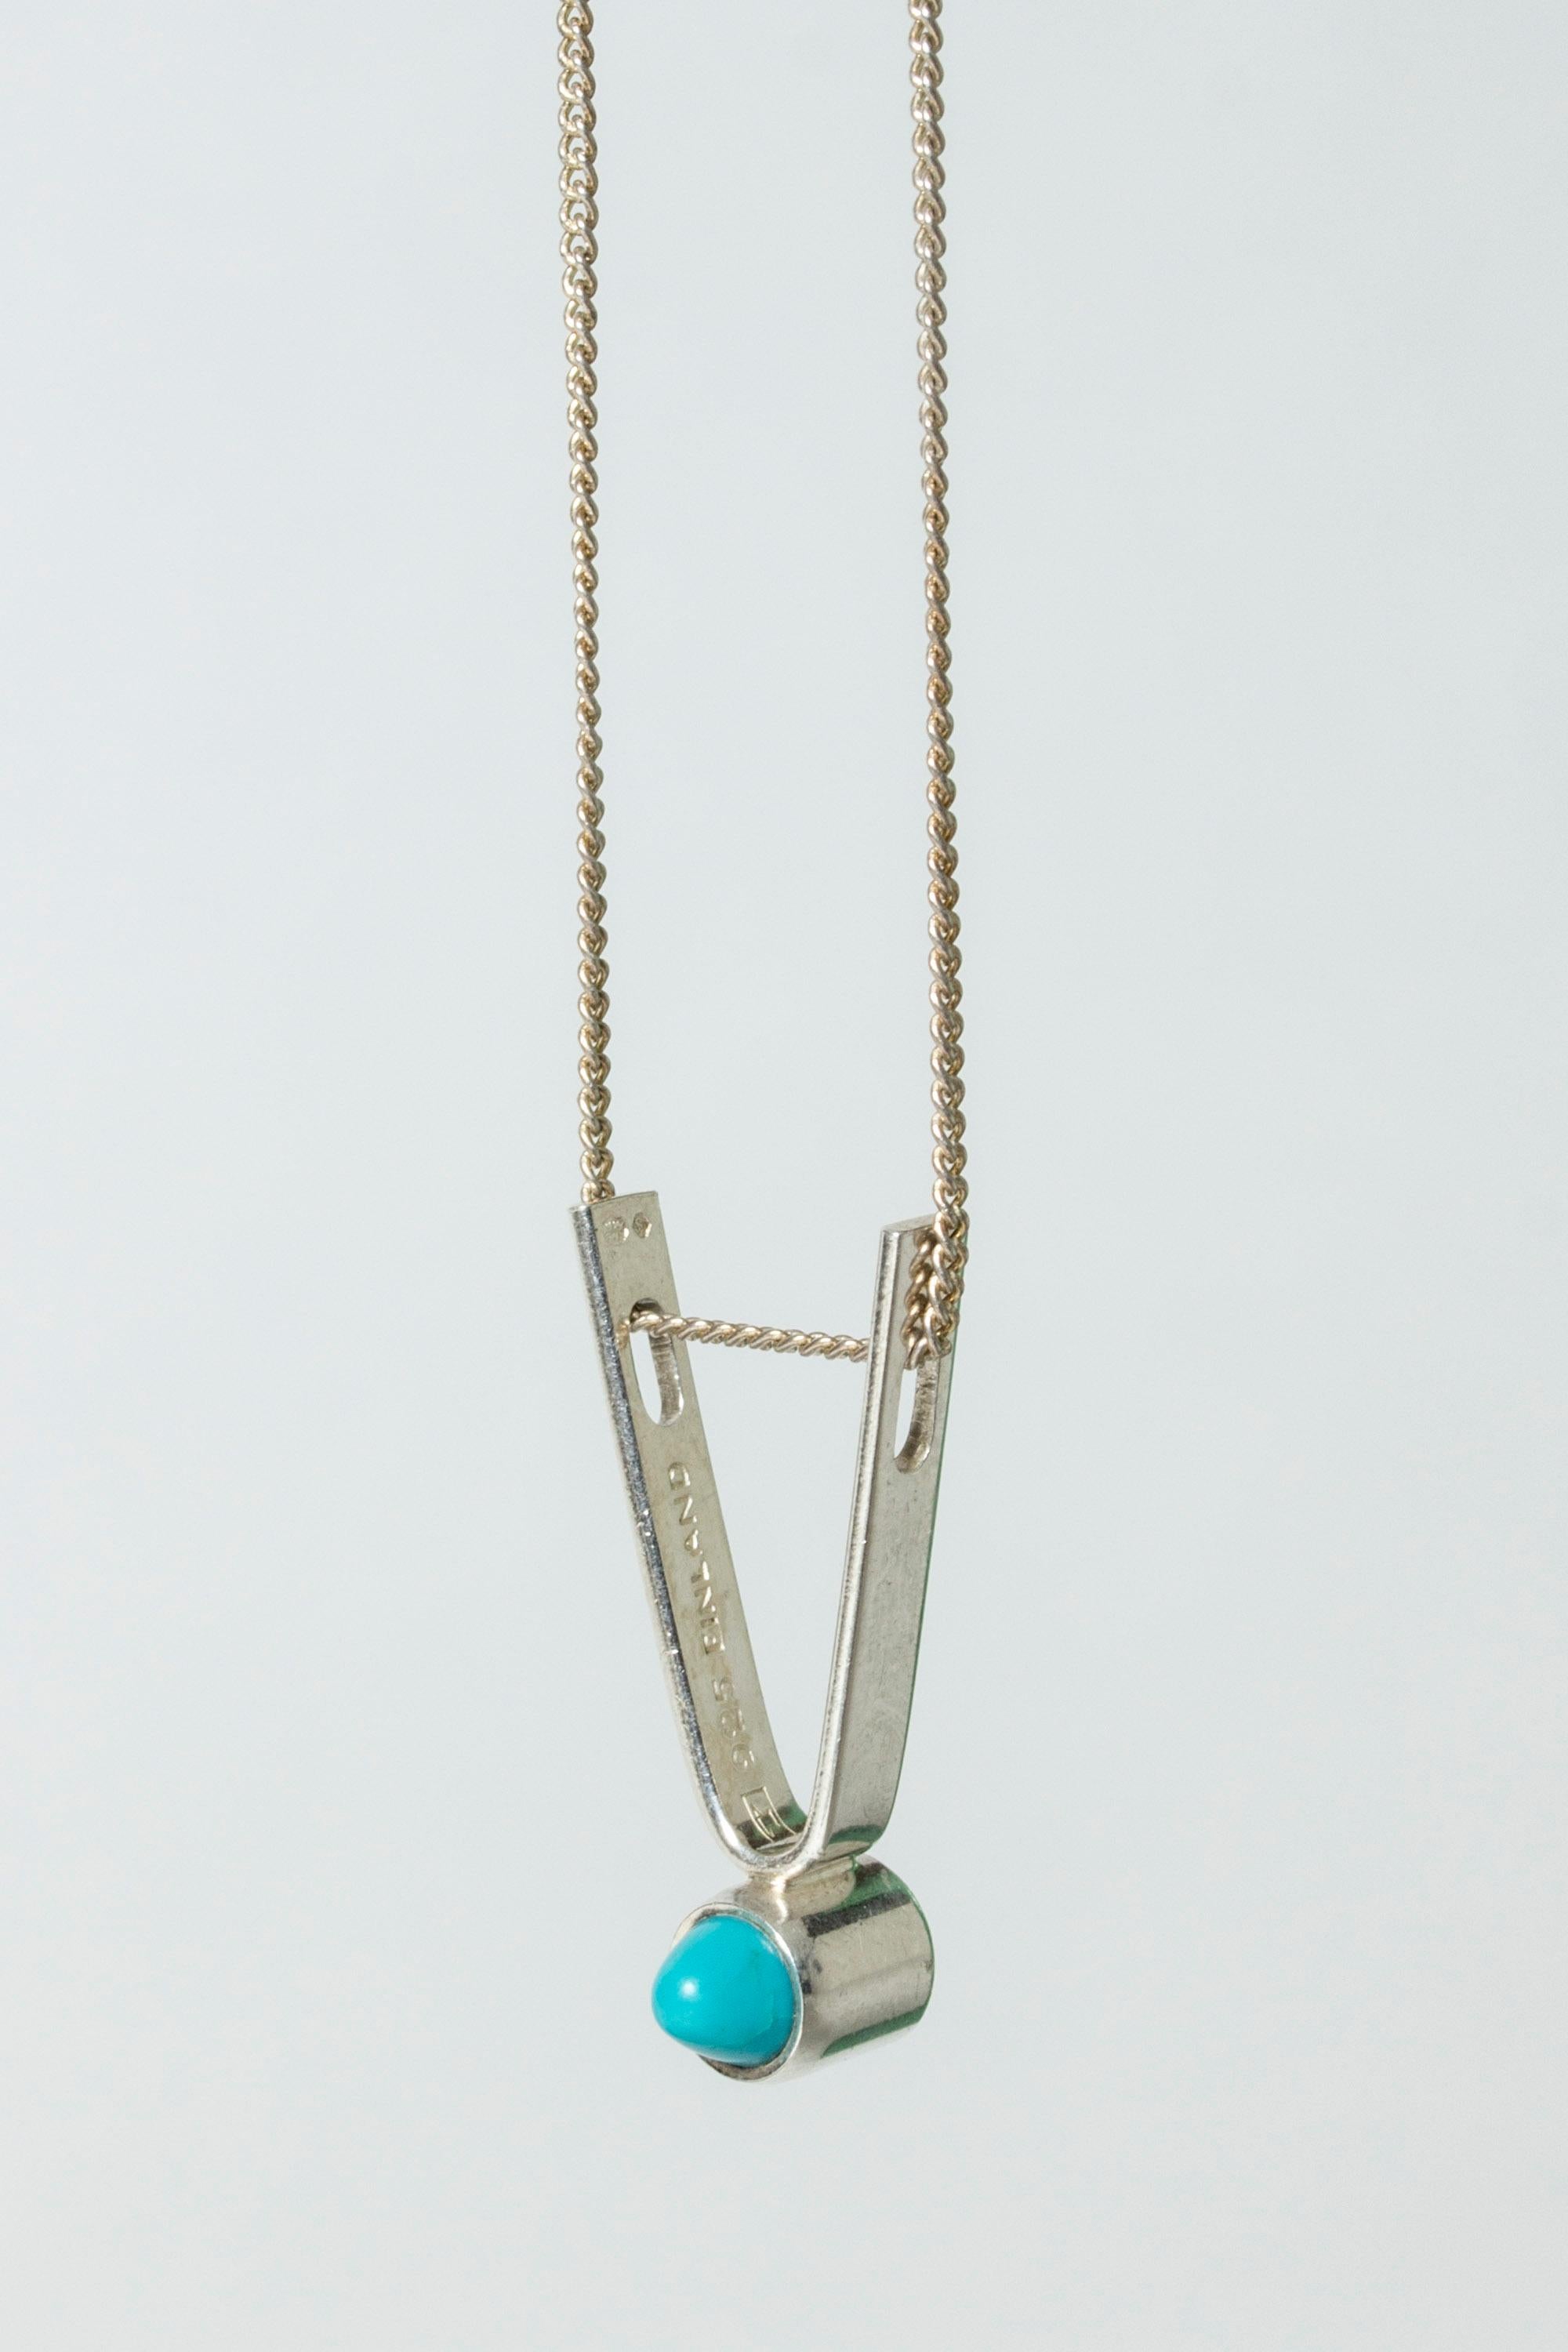 Expressive silver pendant by Elis Kauppi, with a pointy turquoise stone. A great design in a small format, easily becomes a jewelry favorite!